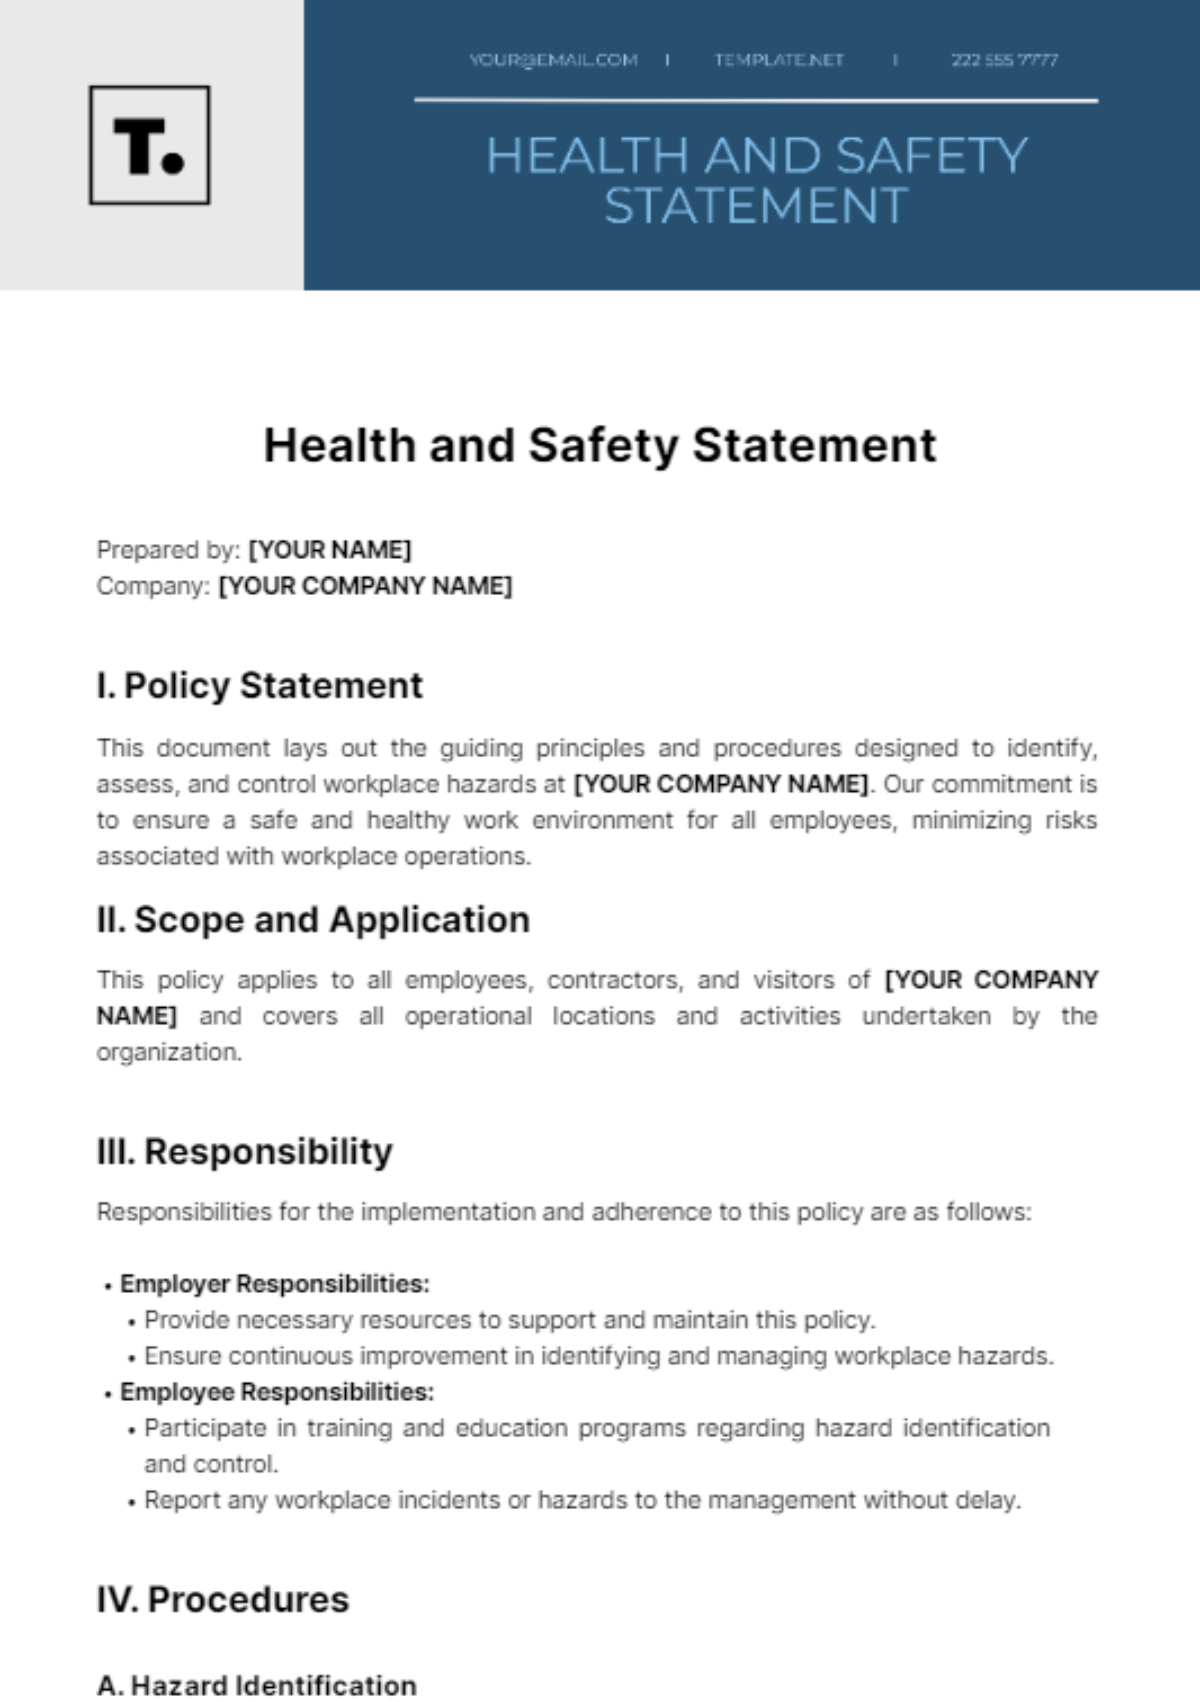 Health and Safety Statement Template